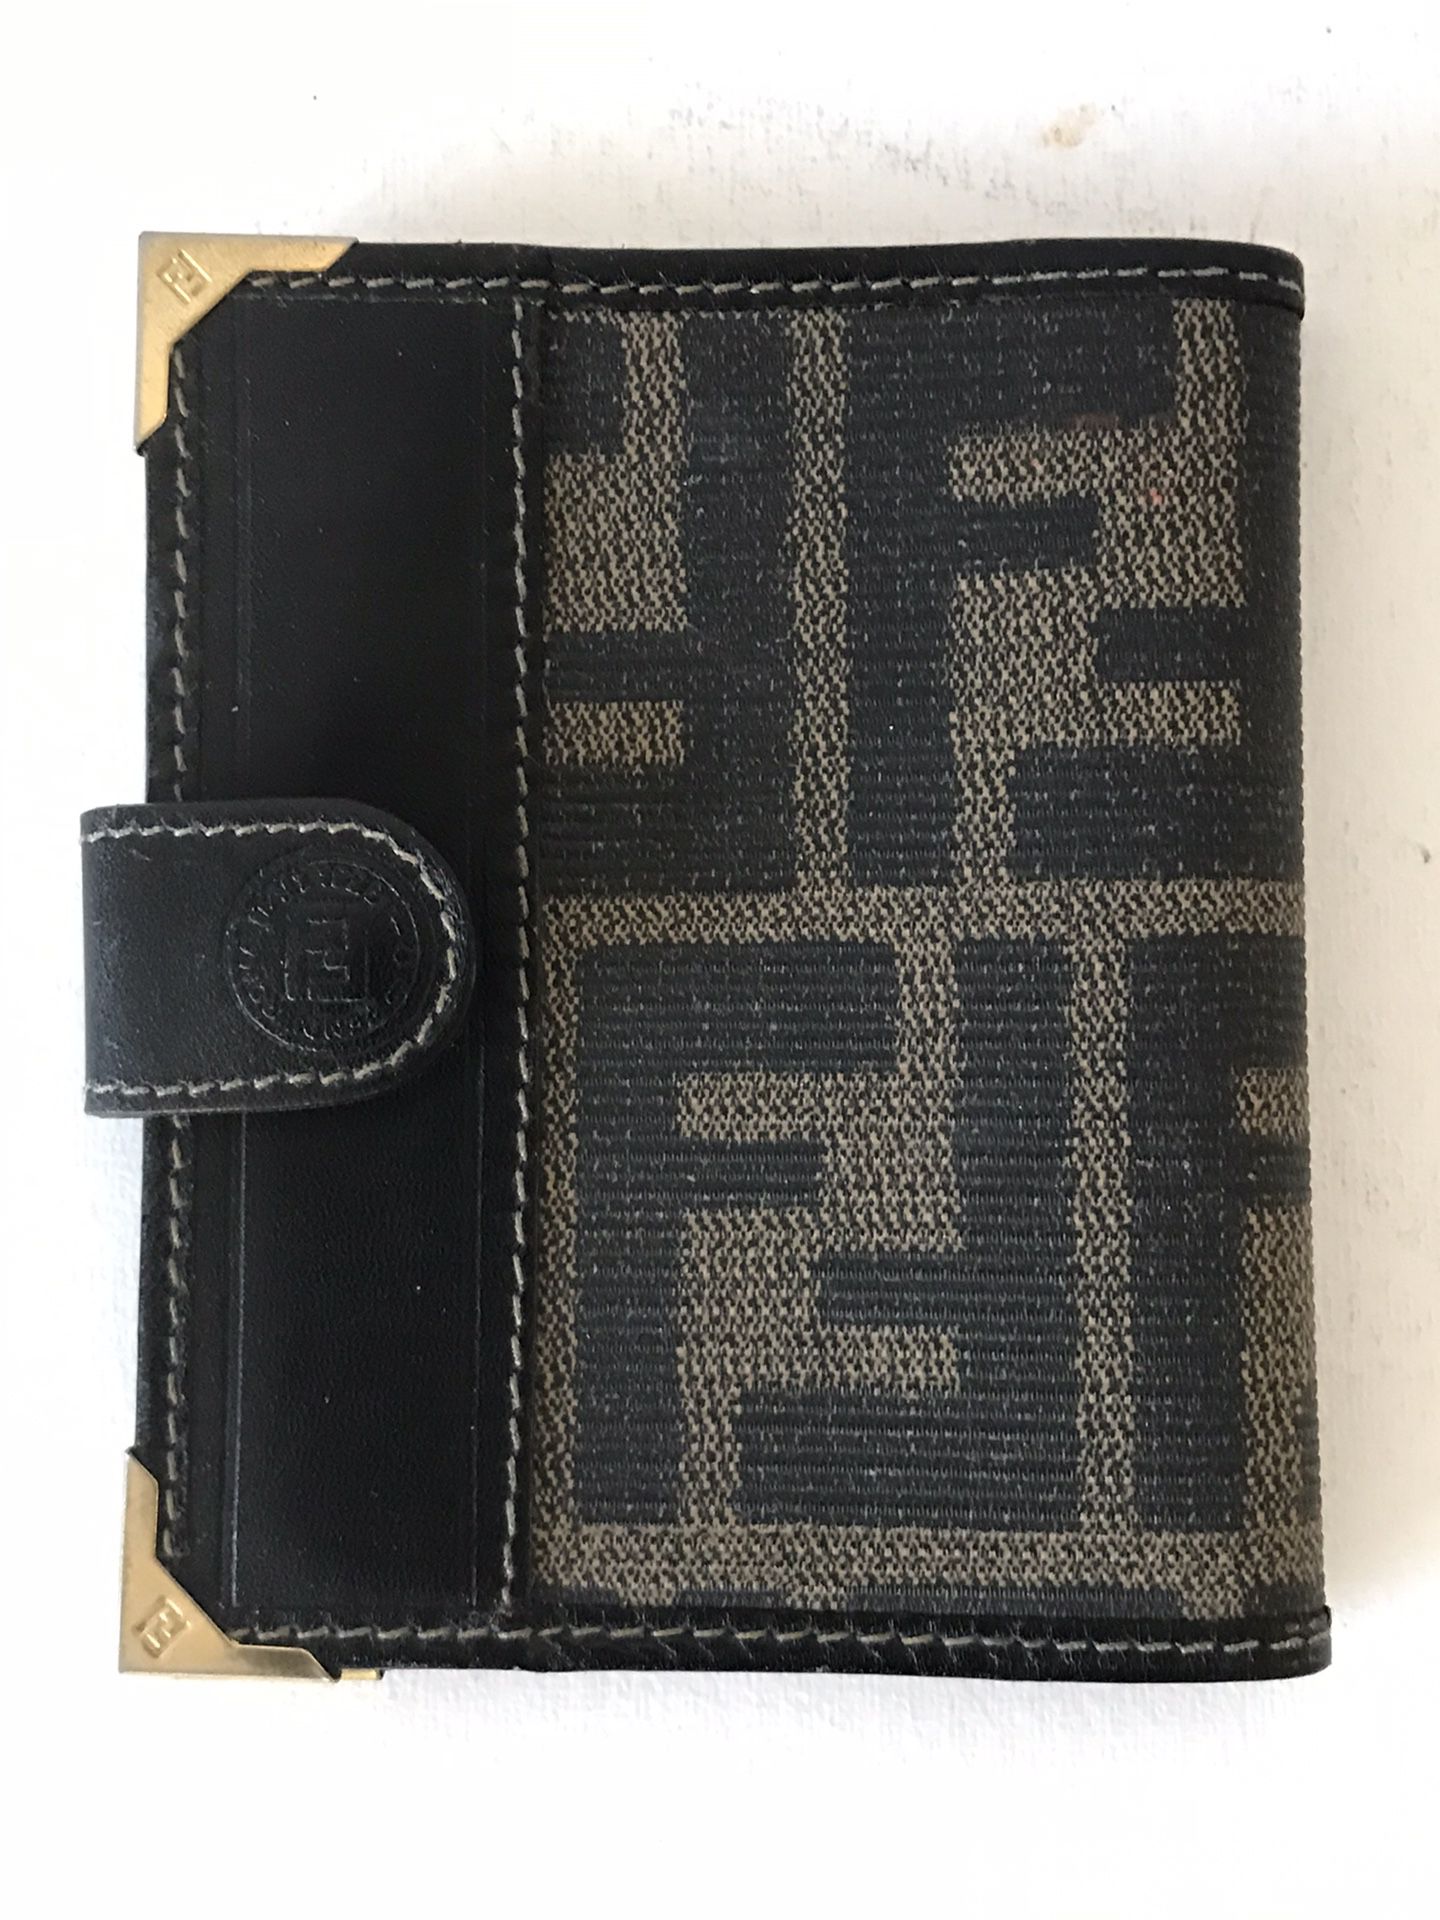 VINTAGE FENDI WALLET 100% AUTHENTIC MADE IN ITALY